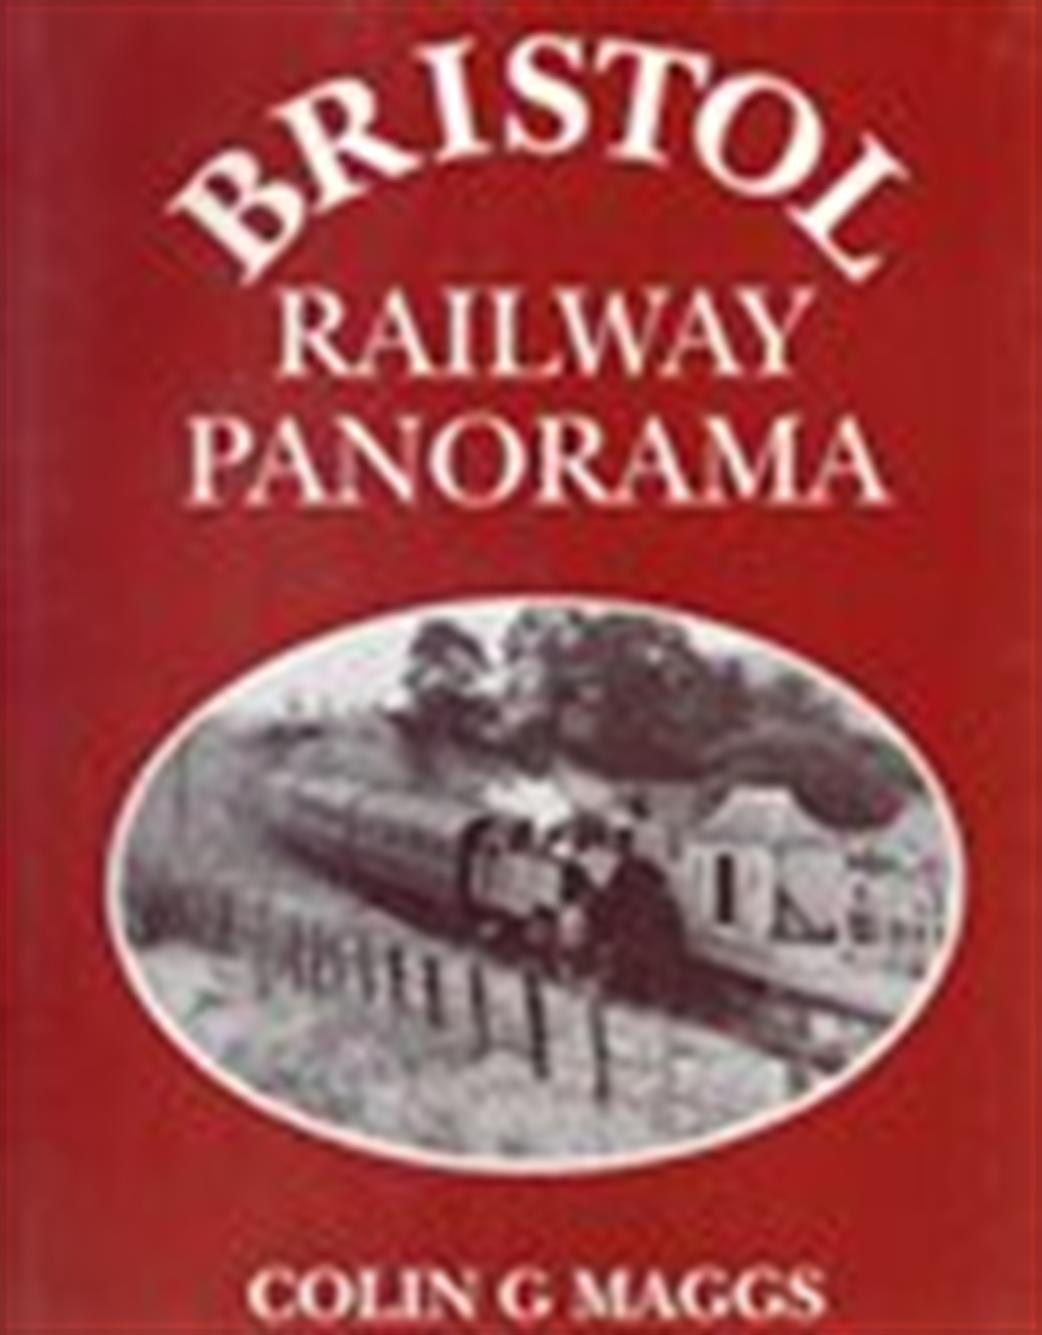 9780948975226 Bristol Railway Panorama by Colin G Maggs